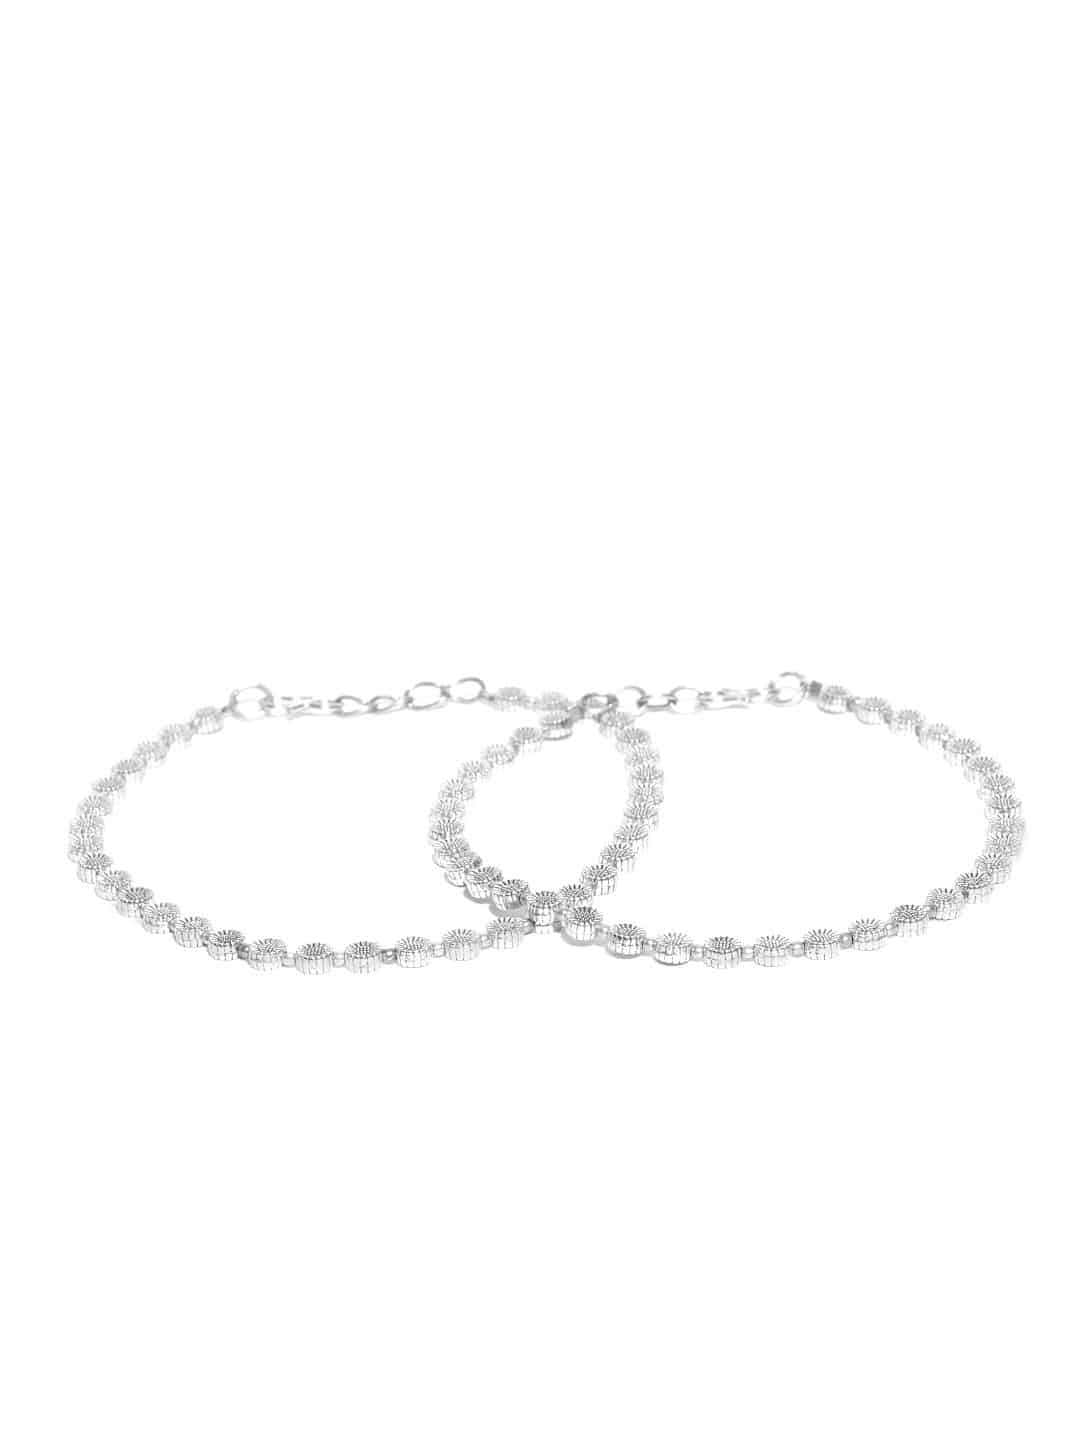 Oxidised Silver Circular Pattern Handcrafted Anklets Set Of 2